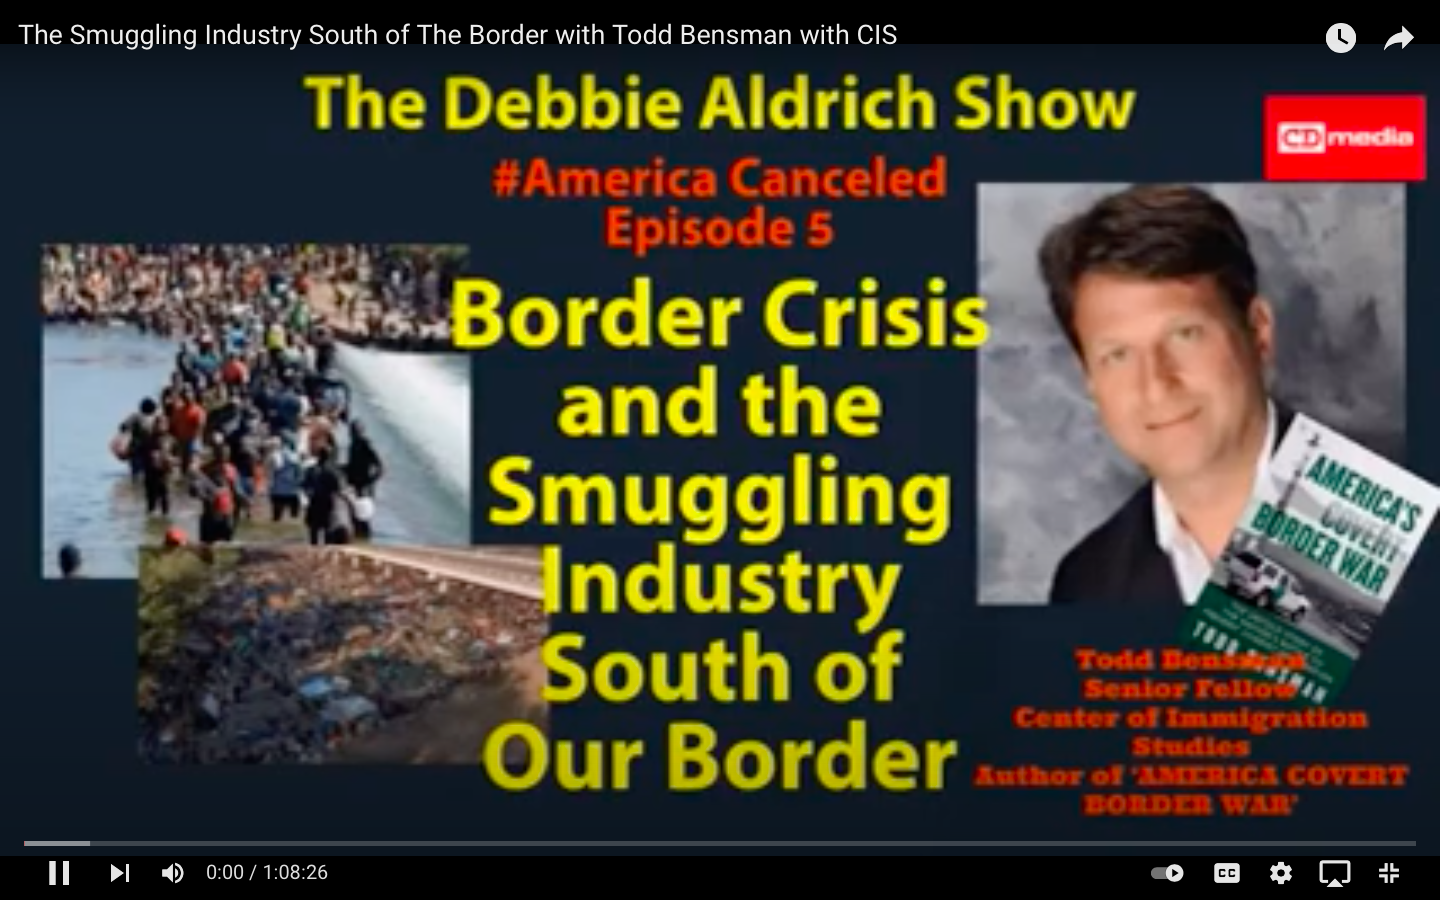 Debbie Aldrich: The Smuggling Industry South Of The Border With Todd Bensman, CIS